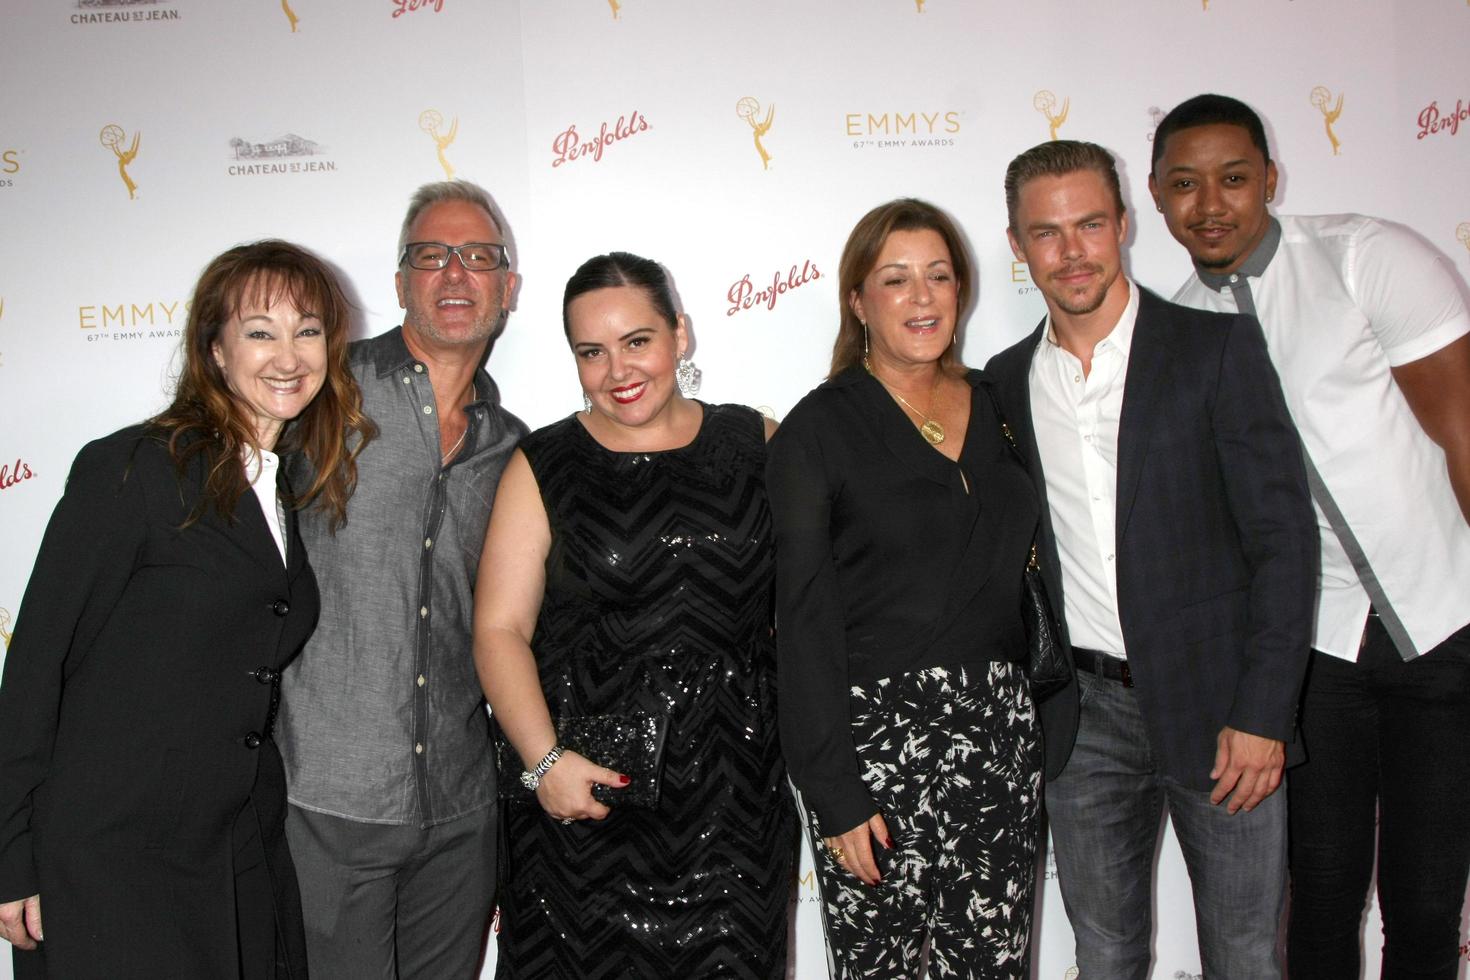 LOS ANGELES, AUG 30 - Tessandra Chavez, Derek Hough at the TV Academy Choreography Peer Reception at the Montage Hotel on August 30, 2015 in Beverly Hills, CA photo